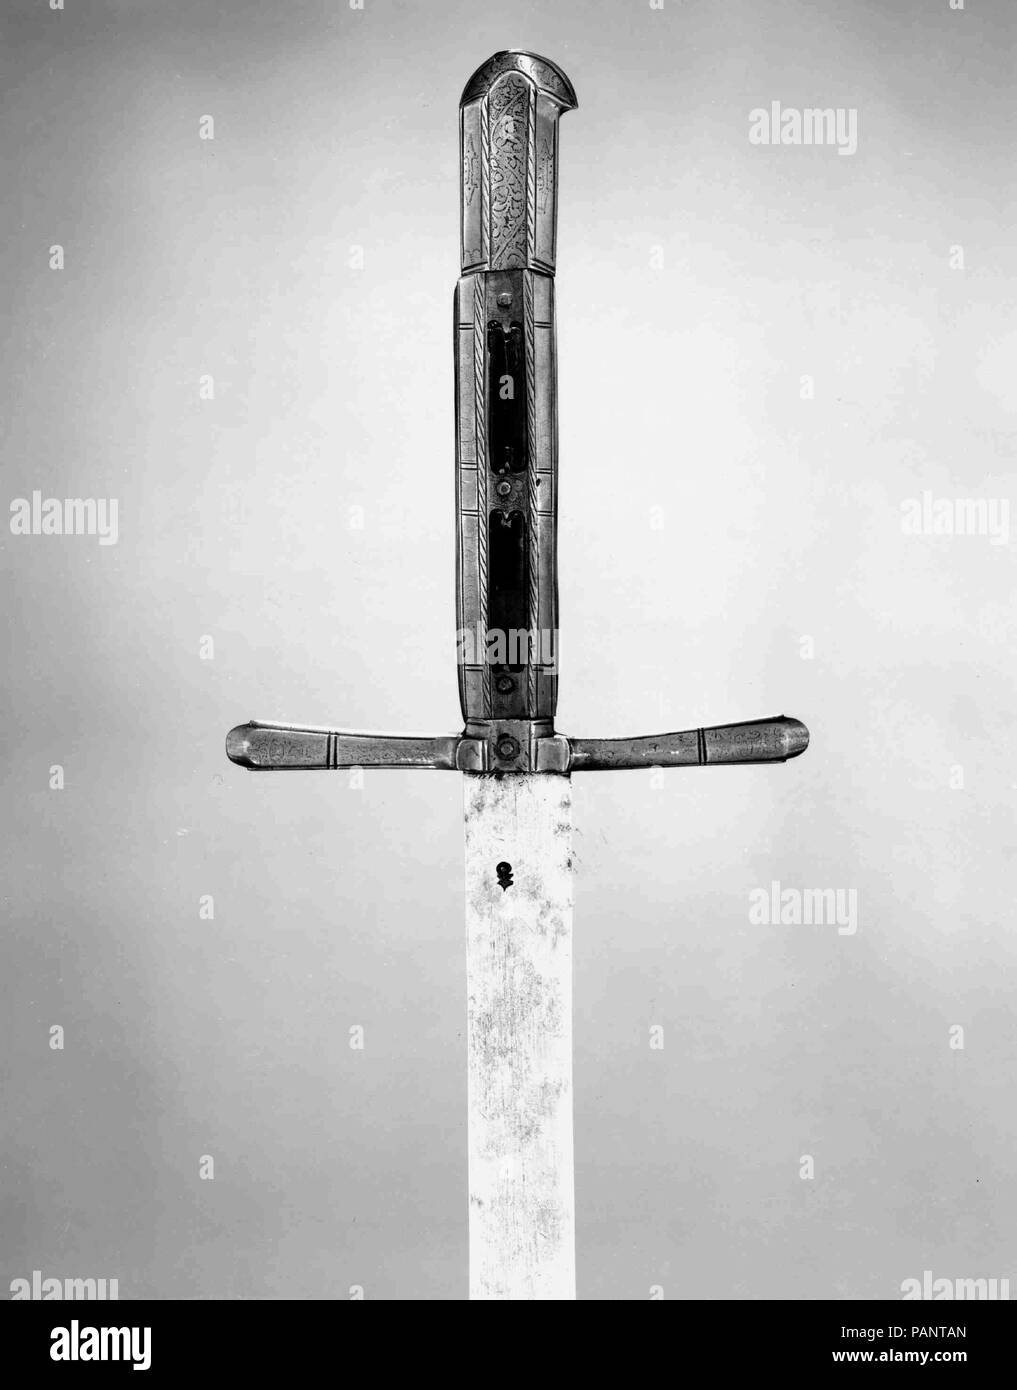 Hunting Sword. Culture: Austrian, Hall. Dimensions: L. 49 1/2 in. (125.7 cm); L. of blade 40 in. (101.6 cm); W. of blade 1 7/16 in. (3.6 cm); Wt. 3 ls. 9 oz. (1615.9 g). Sword maker: Attributed to Hans Sumersperger (Austrian, Hall, active 1492-1498). Date: ca. 1500.  Designed as a defense against large game, such as bear and boar, swords of this type were also worn as civilian sidearms. This example is related in form and decoration to two hunting swords made for Emperor Maximilian I by Hans Sumersperger and therefore may have been intended for a member of the imperial court. Museum: Metropoli Stock Photo